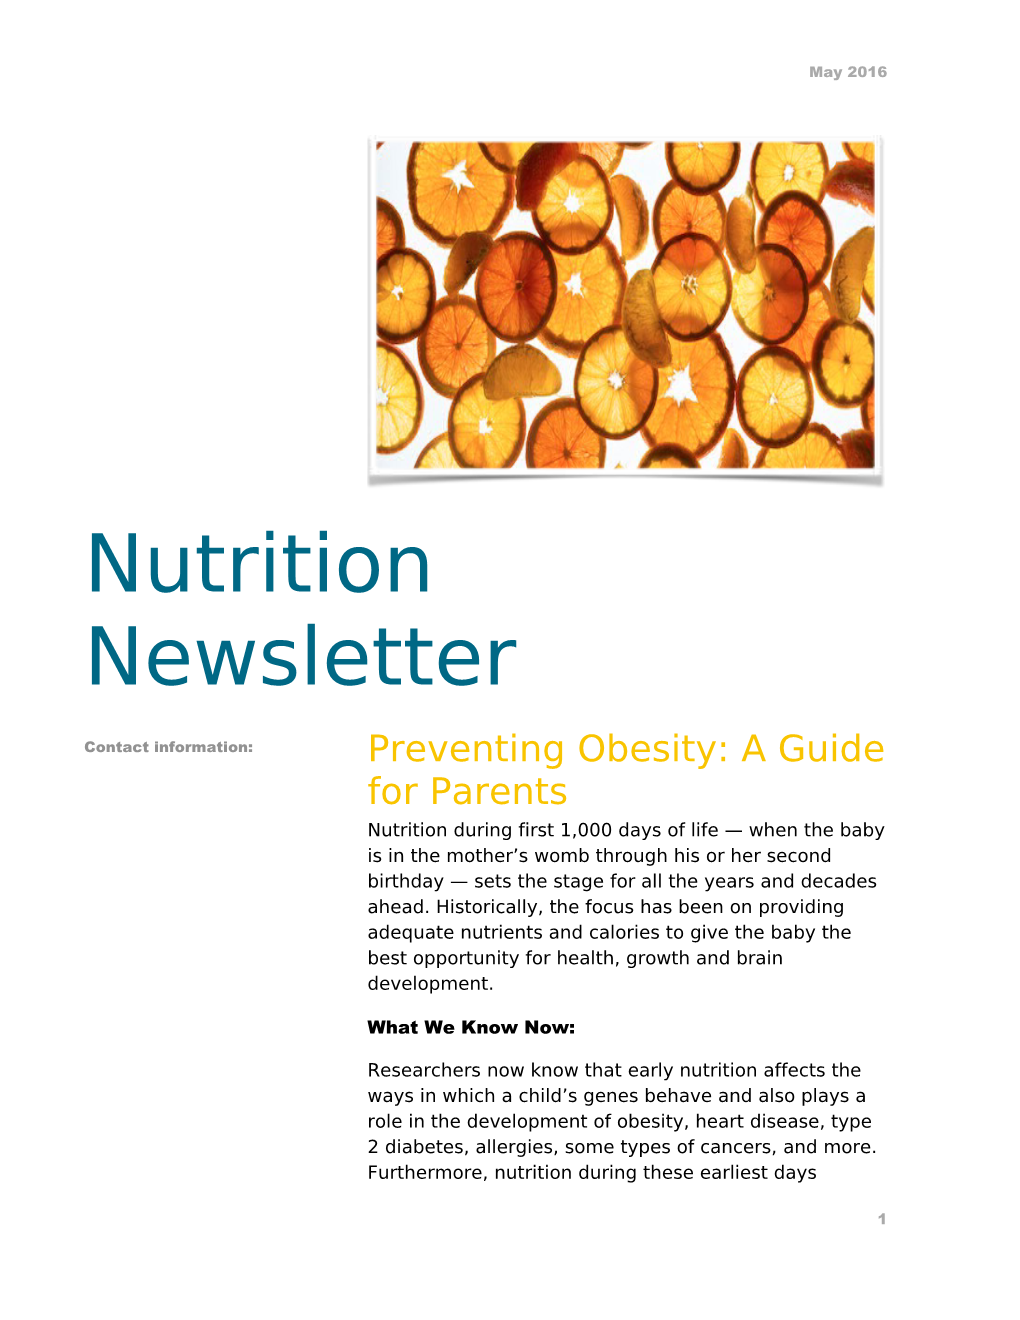 Preventing Obesity: a Guide for Parents